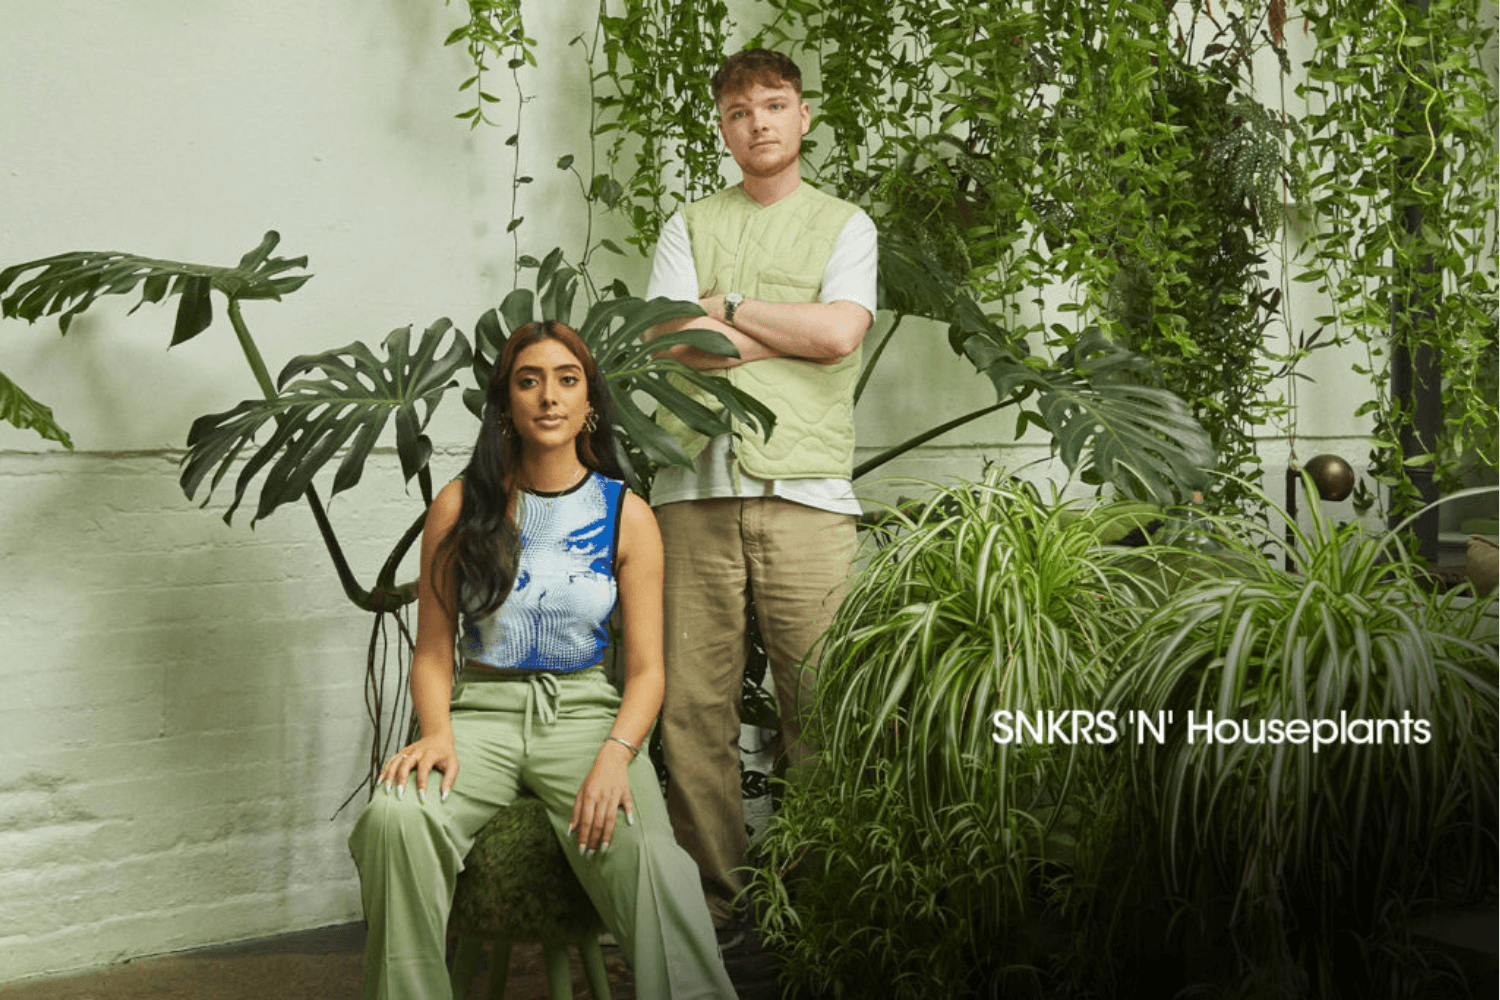 An interview with sneaker sustainability advocates SNKRS ‘N’ Houseplants